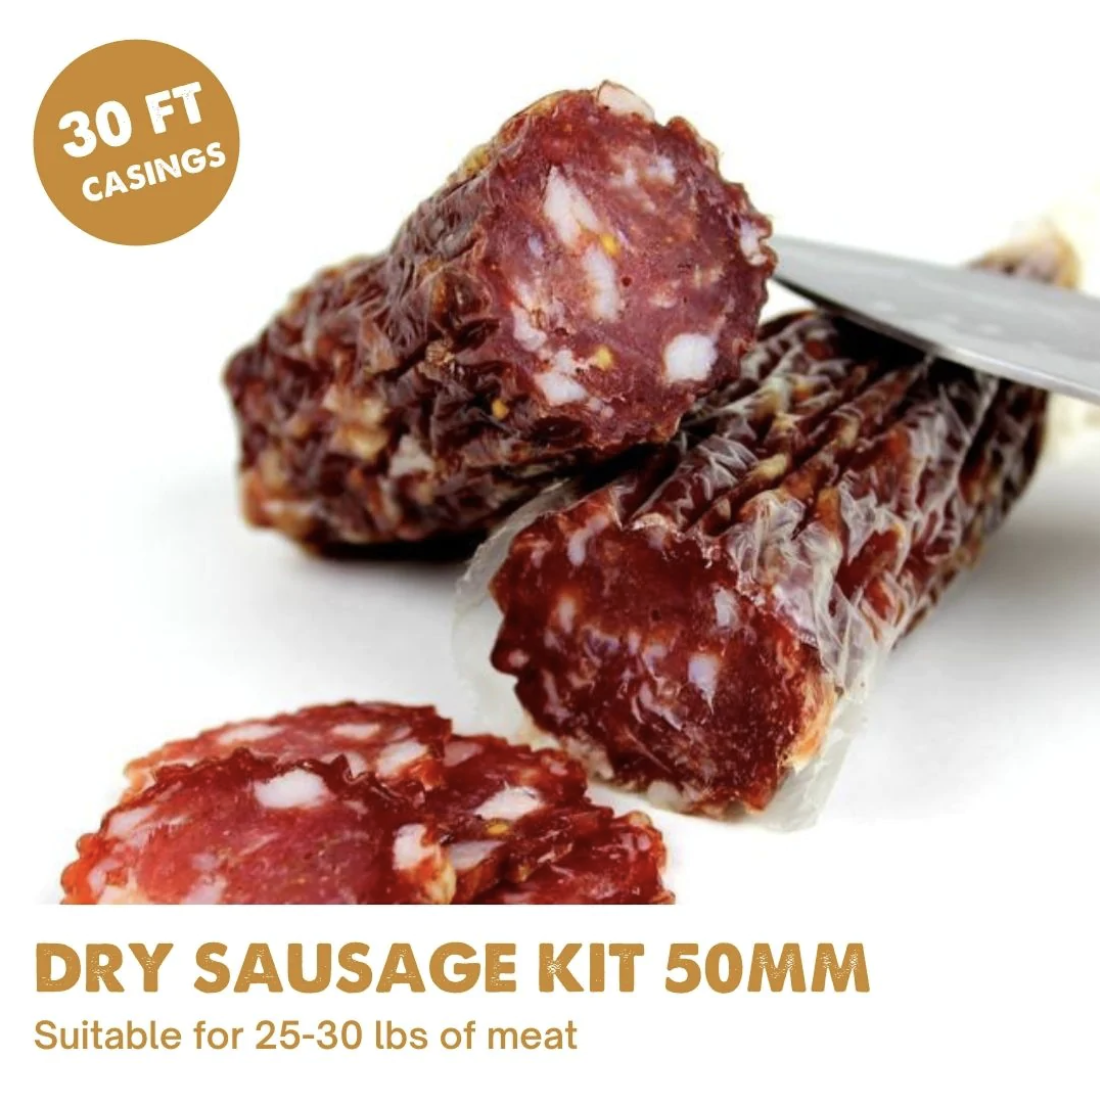 dry cure sausage making kit - 50mm casings